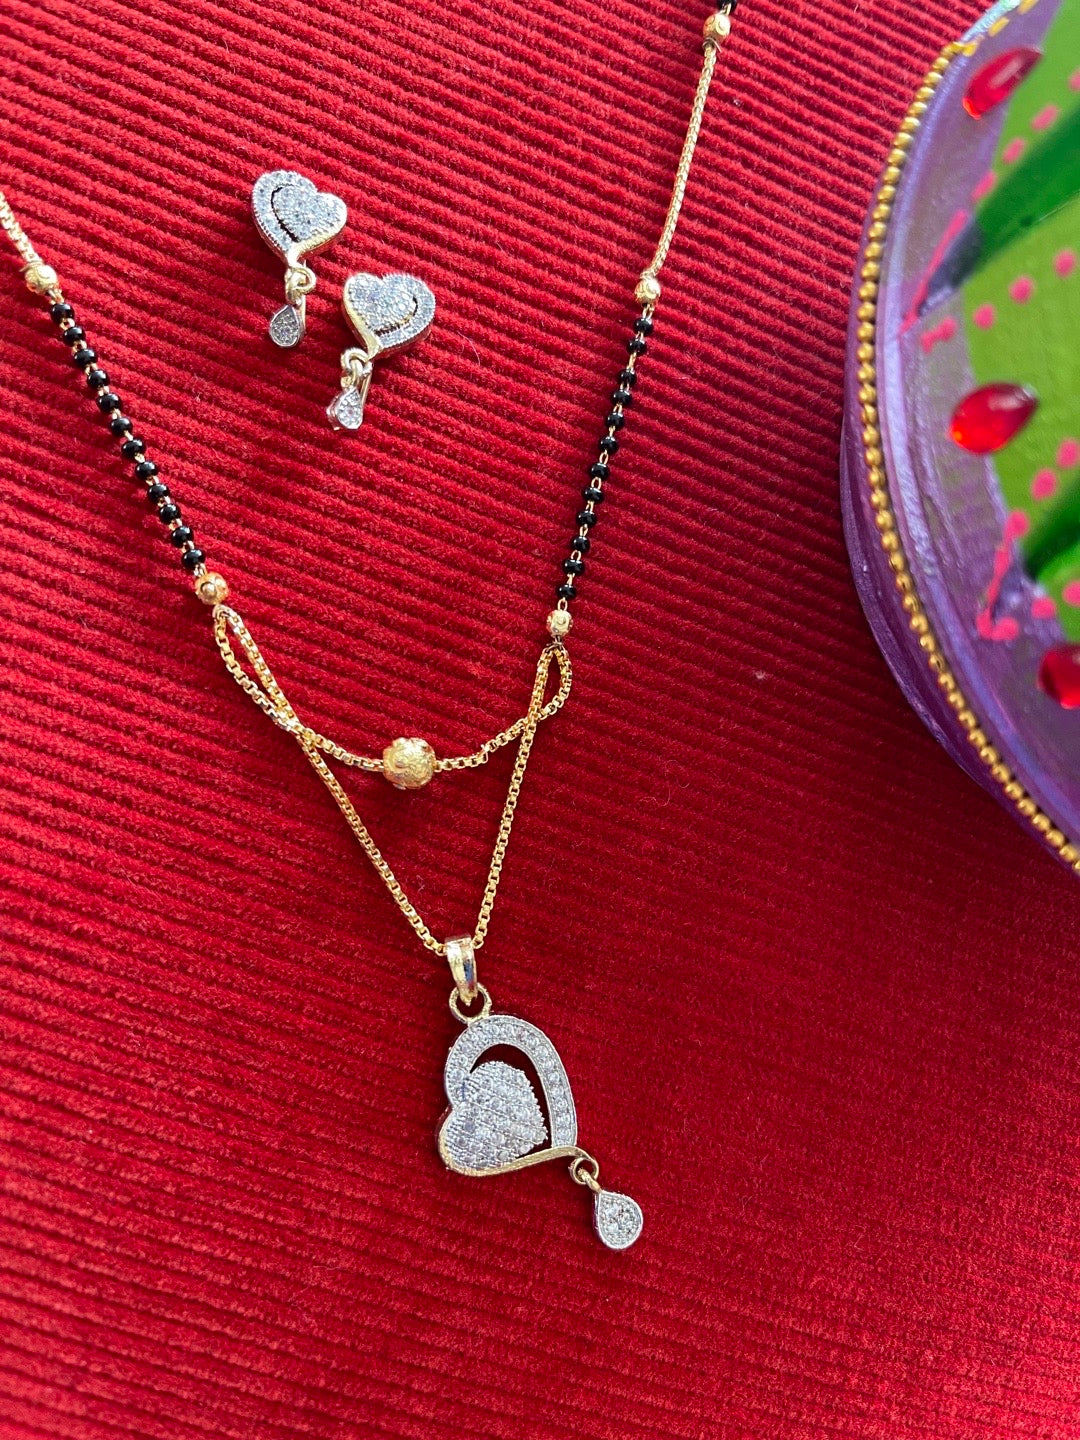 image for Short Mangalsutra Designs set with earrings gold mangalsutra diamond Love heart black beads chain